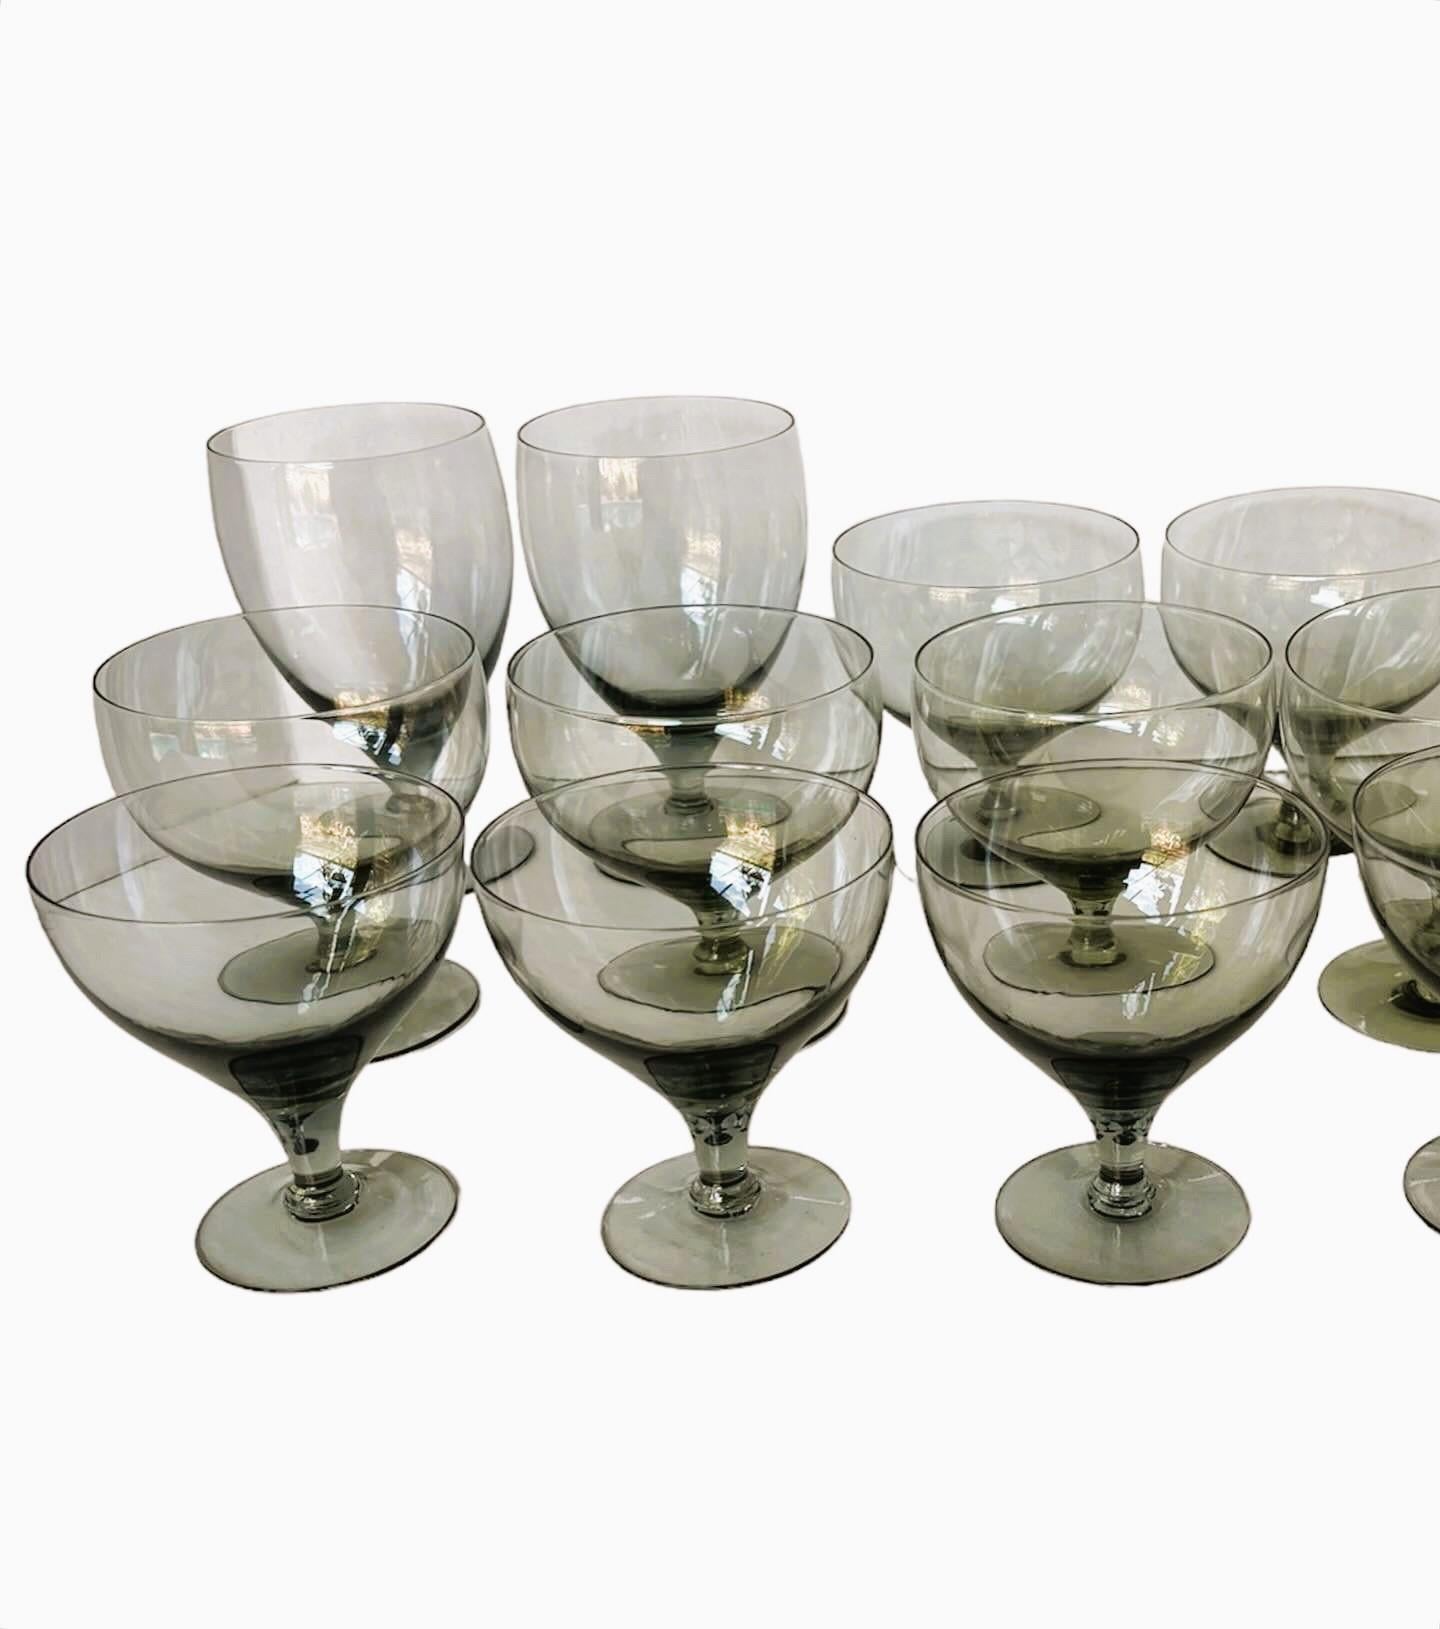 Mid Century Modern grouping of 15 American Modern tall goblets designed by Russel Wright and manufactured by Morgantown. Consisting of 15 Granite Gray stem glassware in three different sizes all in Very Good condition. Since the glasses were hand